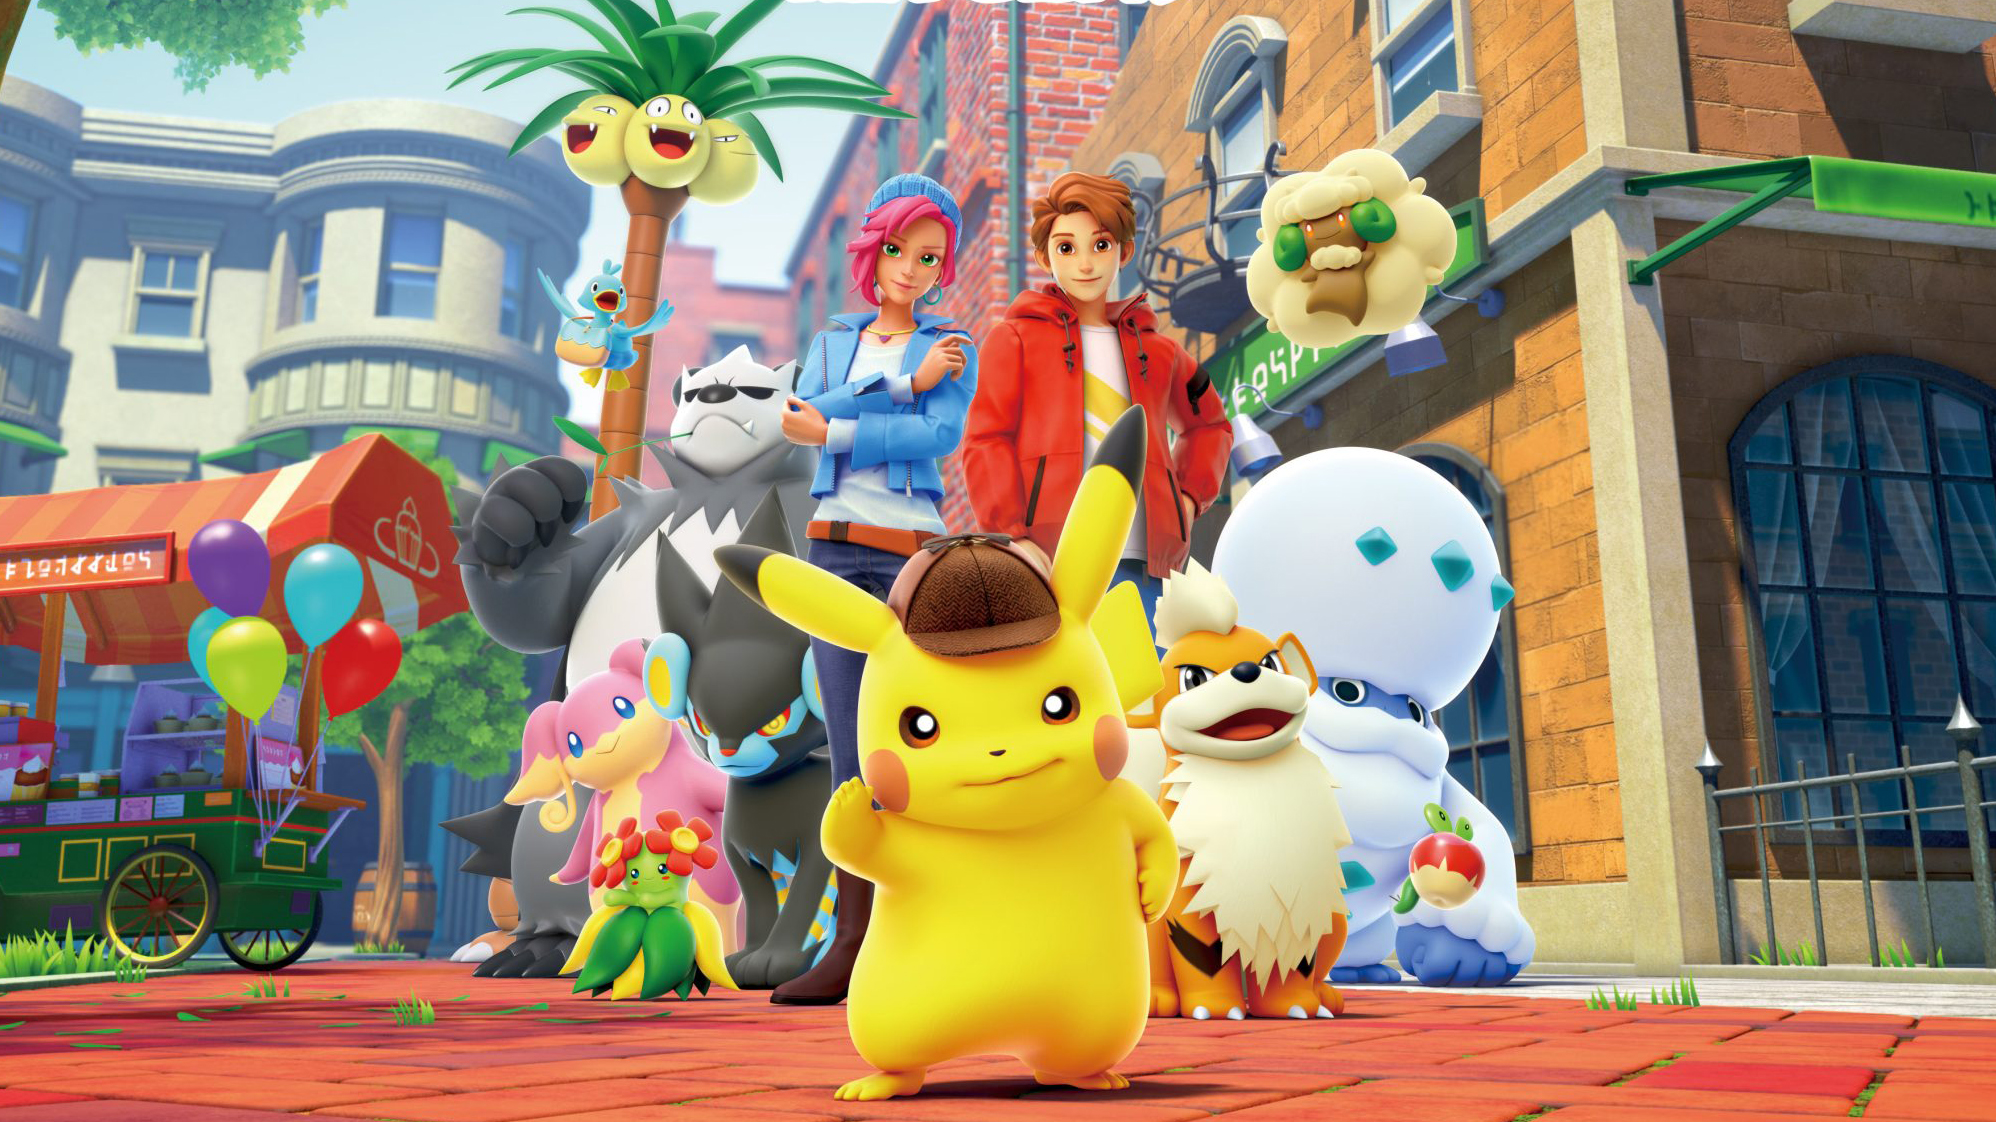 Key art for Detective Pikachu Returns featuring Pikachu, Growlithe, Tim Goodman, and other characters standing in Ryme City